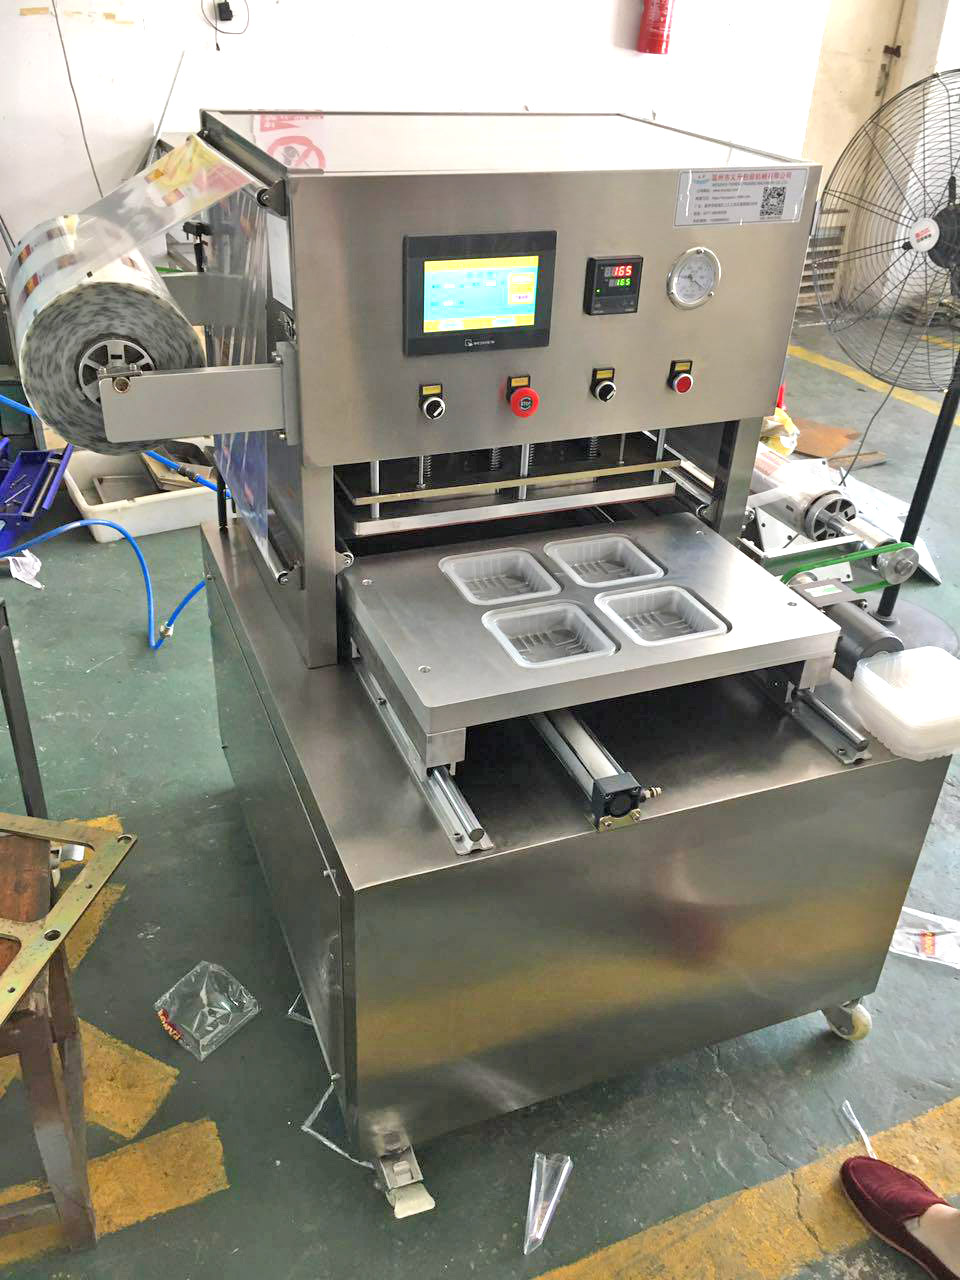 automatic cup sealing machine